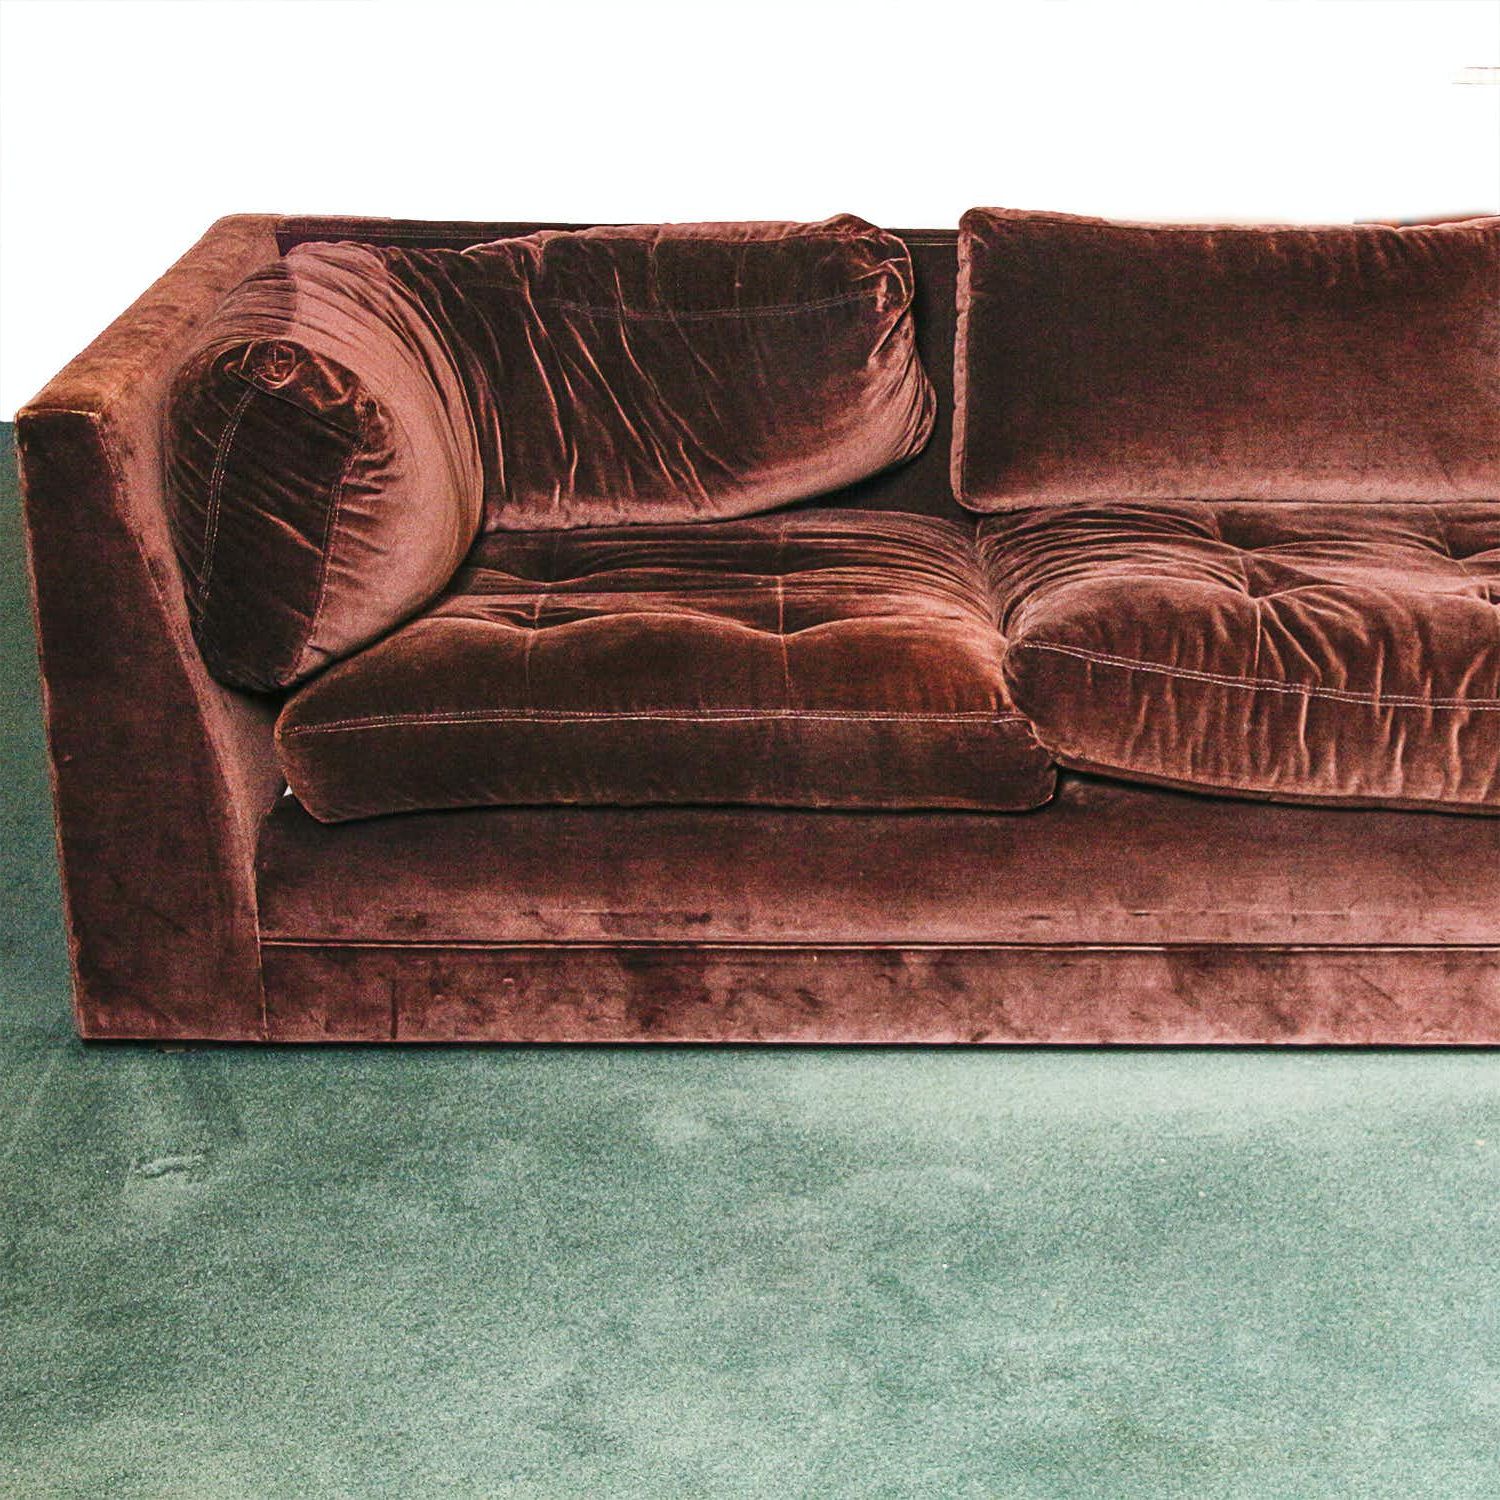 2018 Chocolate Brown Velvet Upholstered Sectional Sofa : Ebth With Regard To Sofas In Chocolate Brown (View 10 of 15)